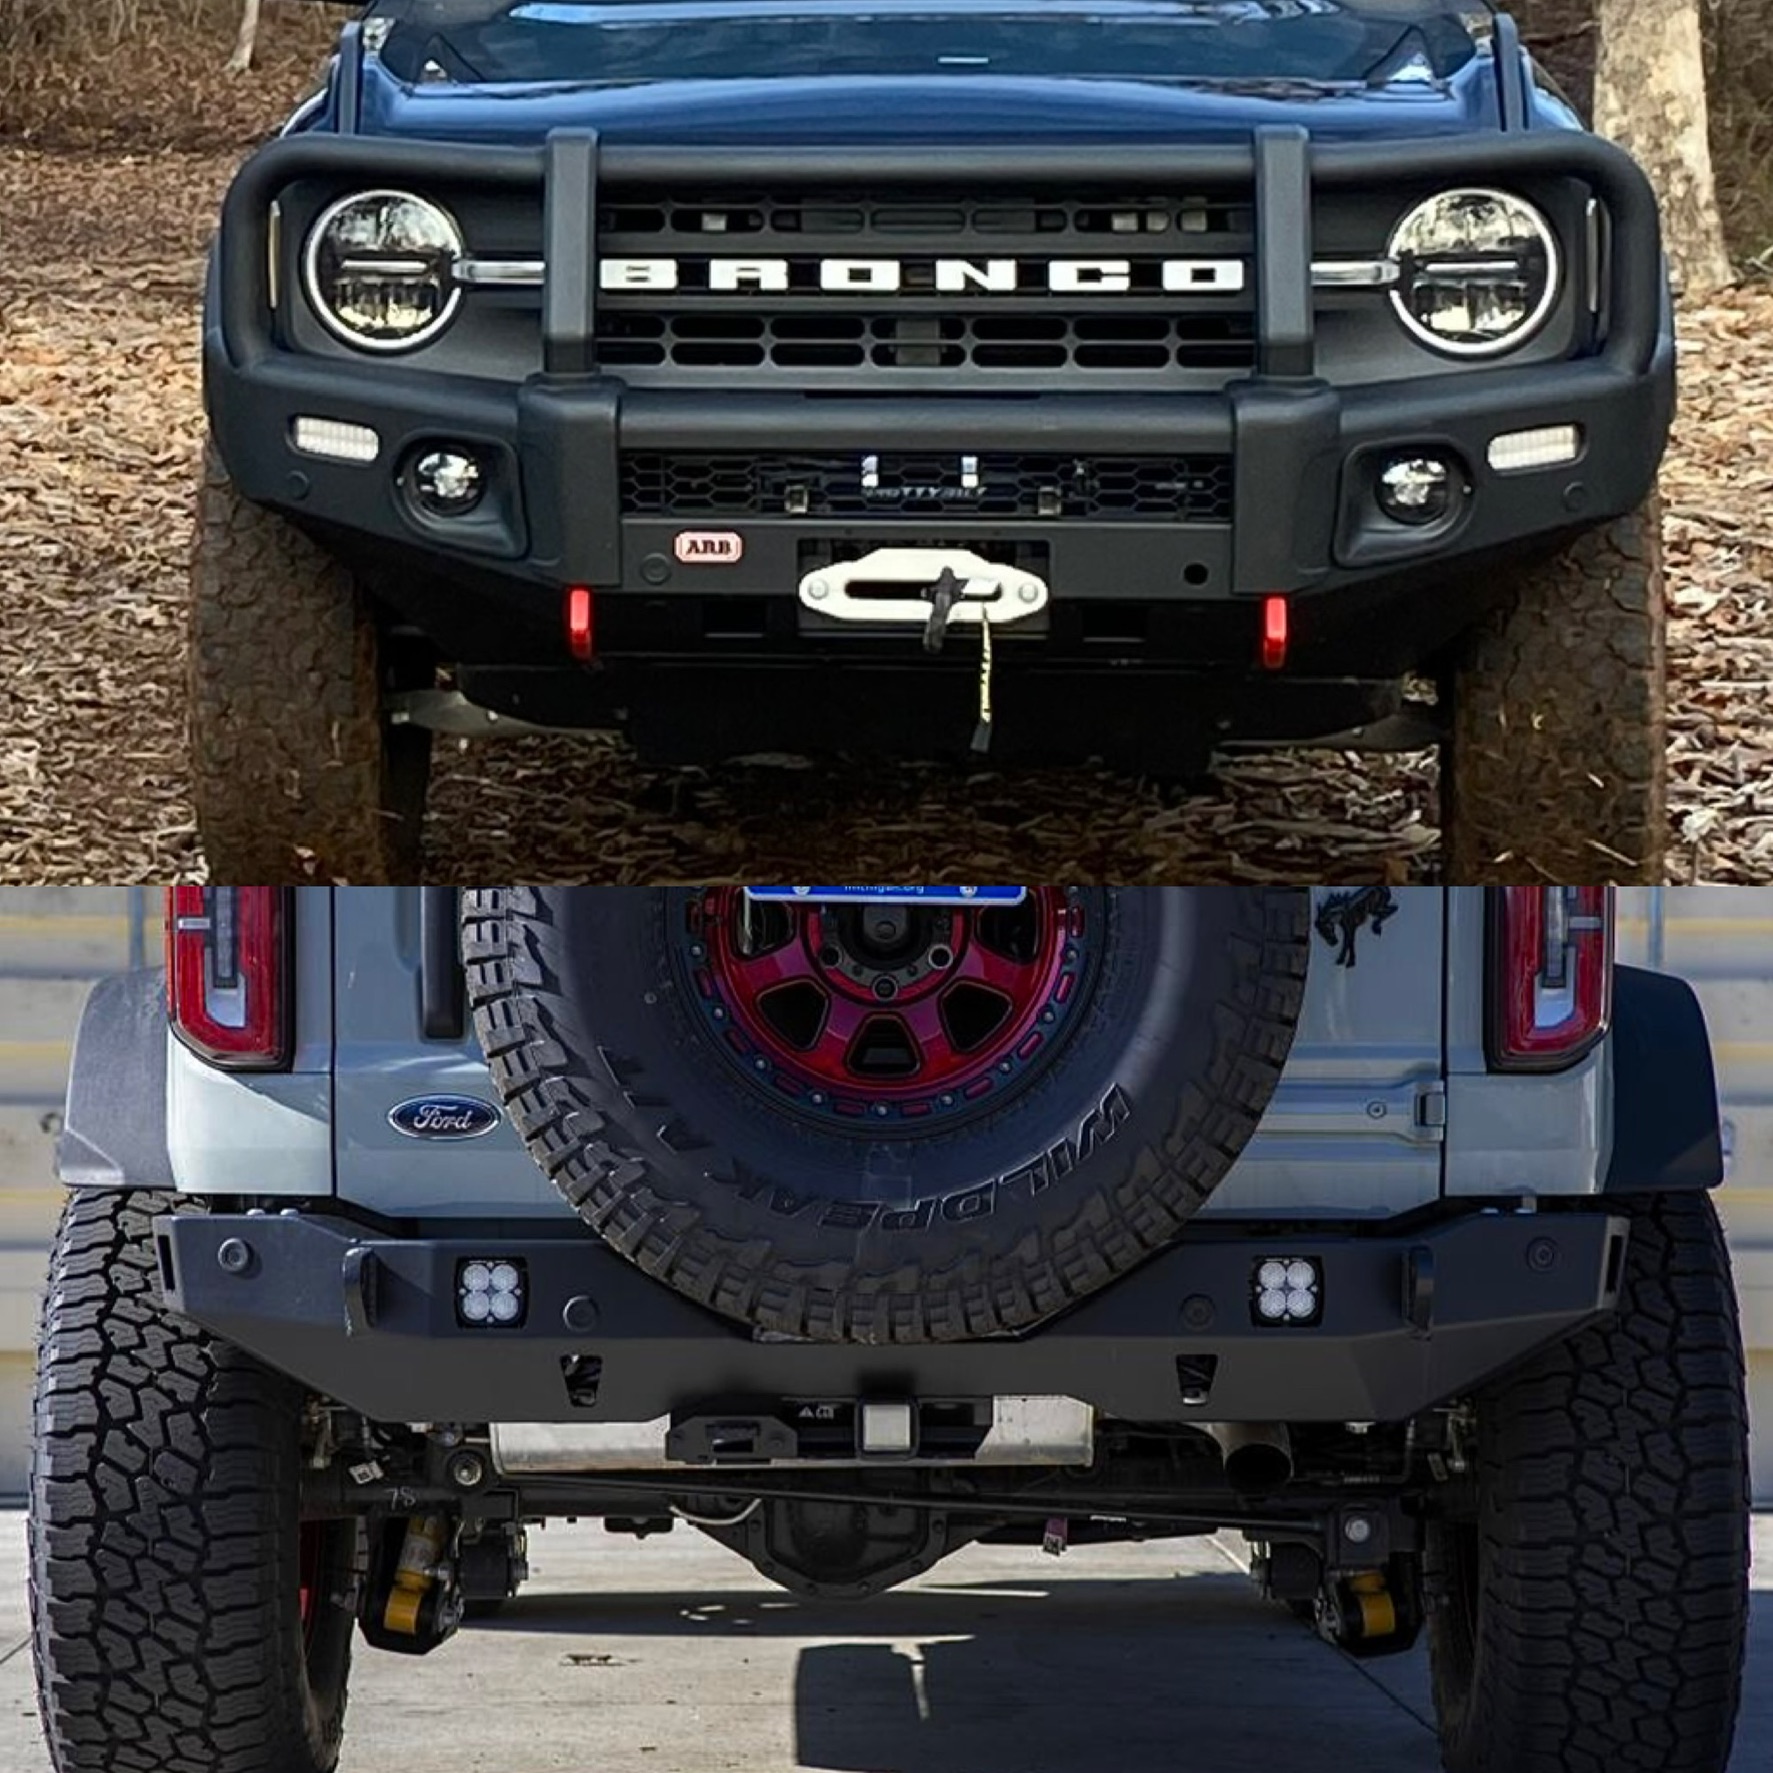 Ford Bronco JcrOffroad’s new Crusader front and rear bumper! CF9BE6F7-6149-4E4B-AE16-90A2A2FB31AA